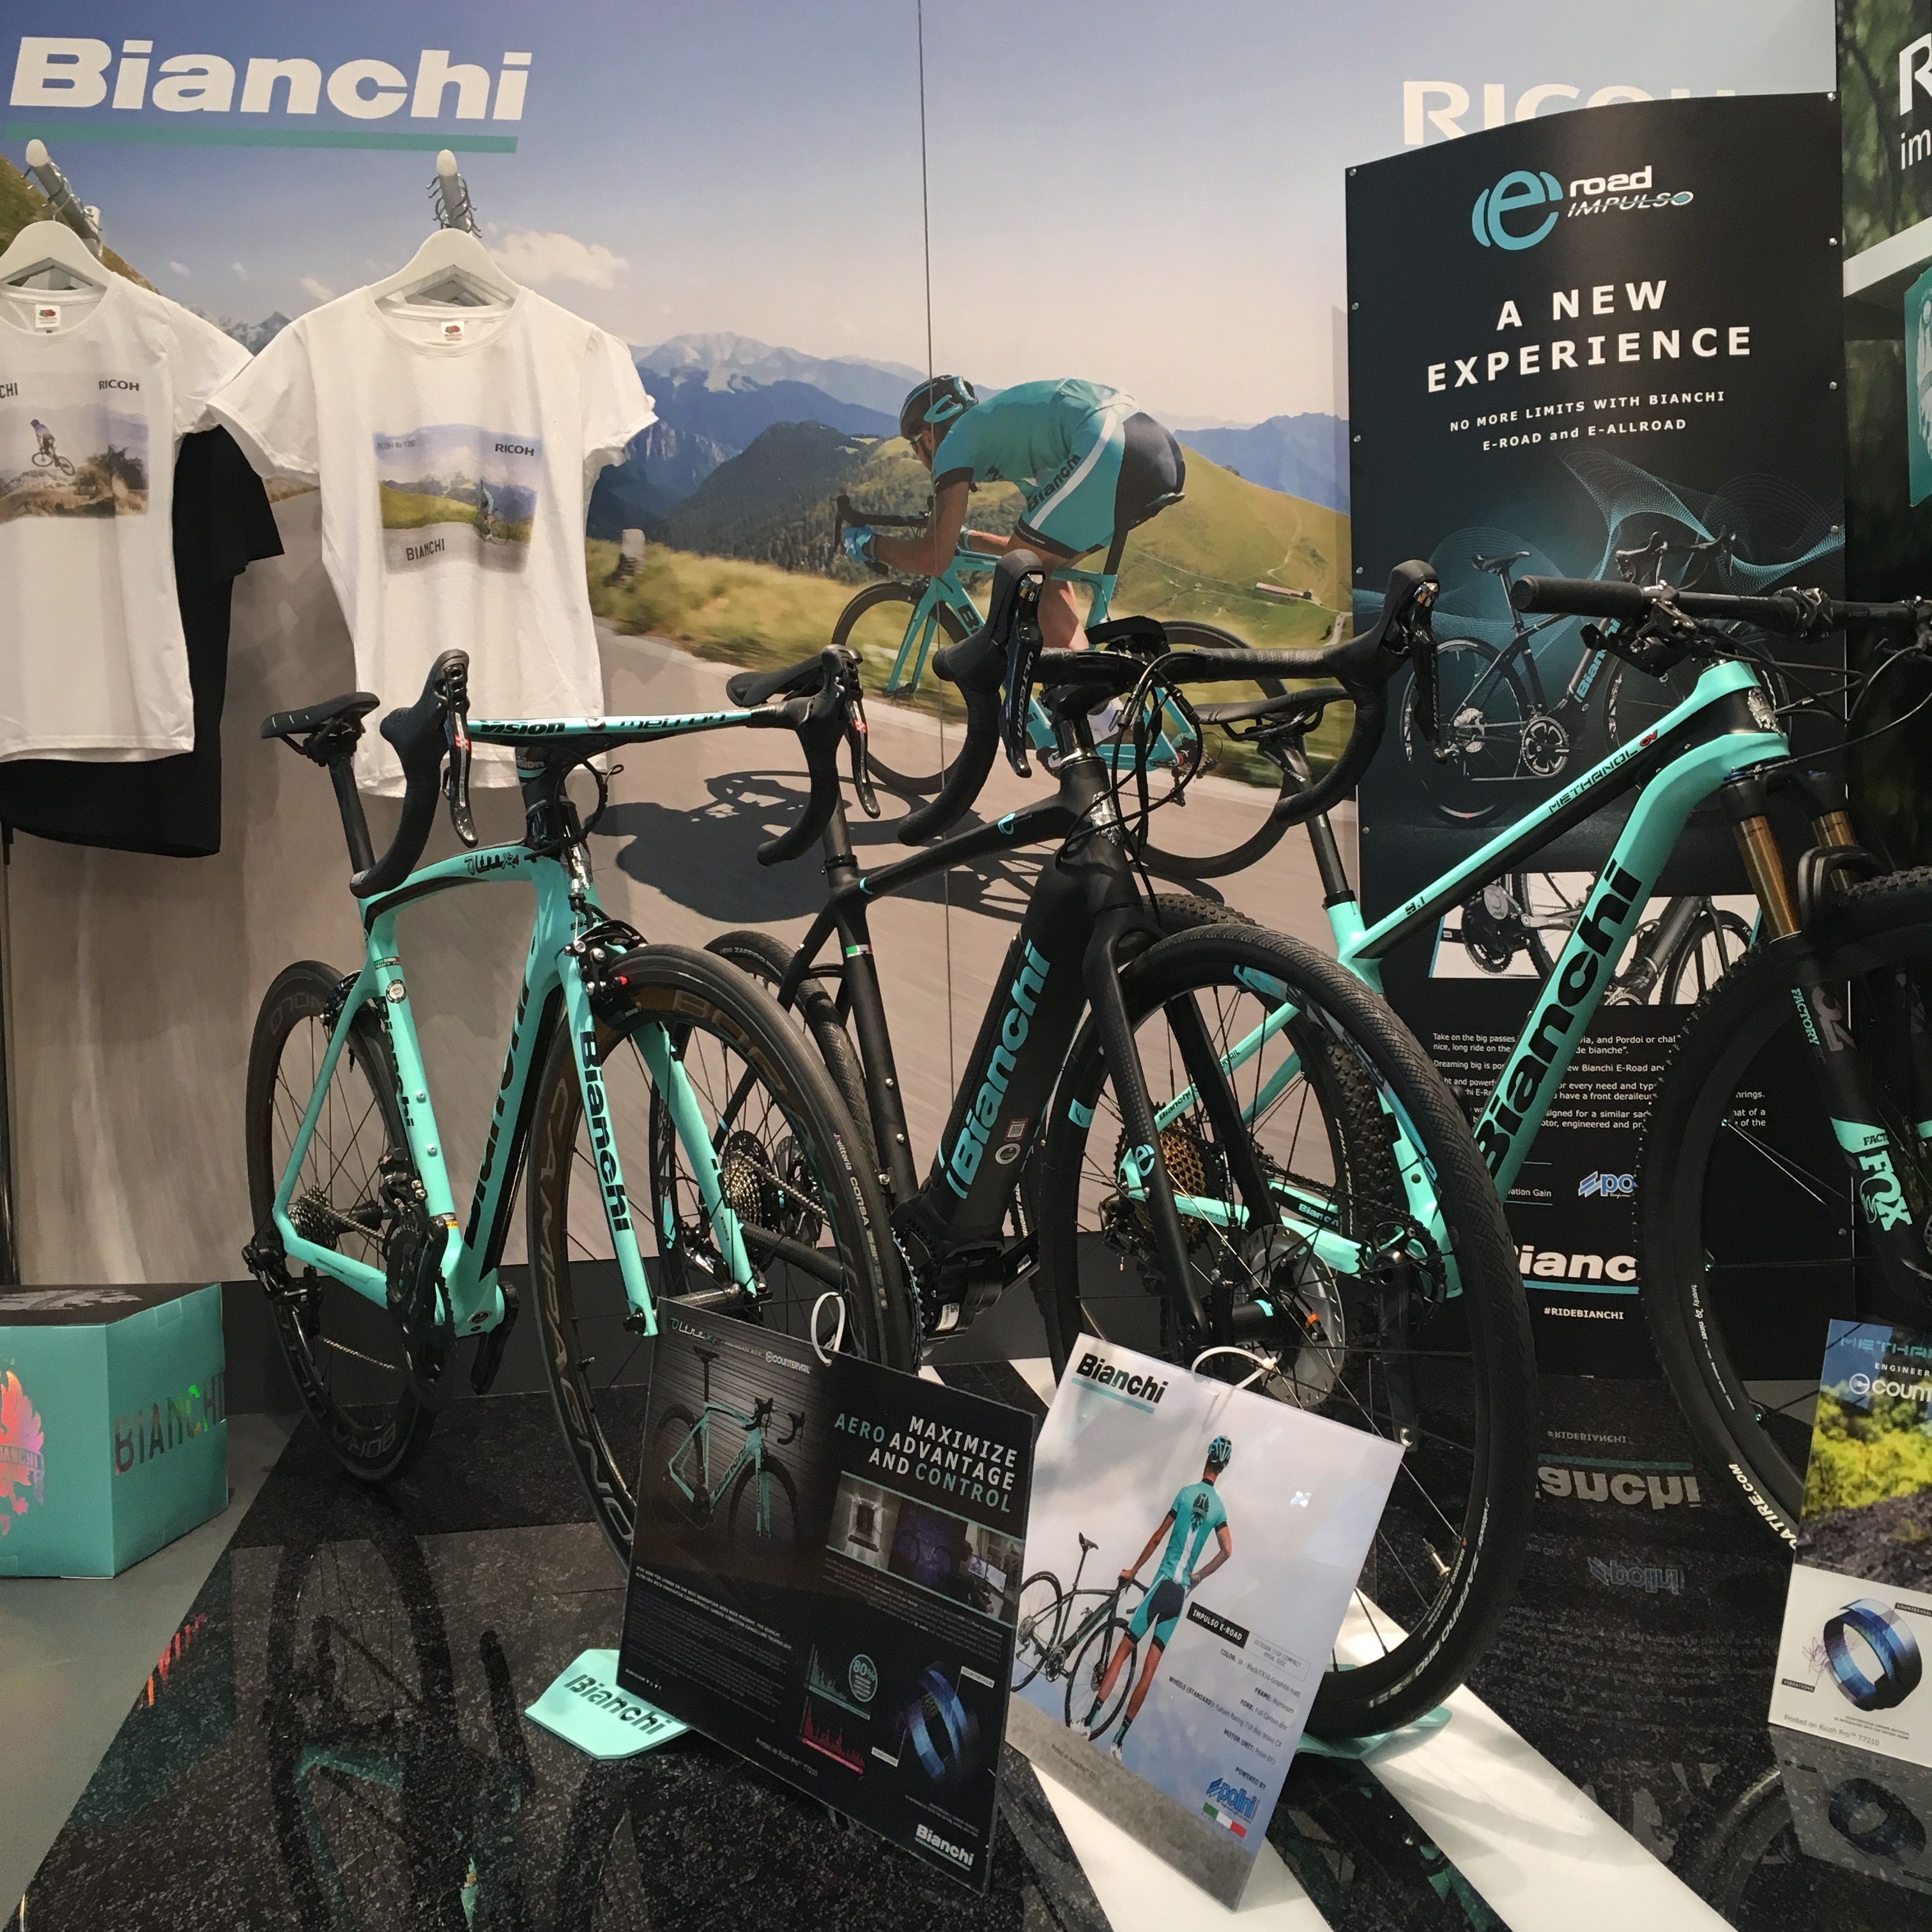 Ricoh’s broad portfolio of solutions showcased The Power of Colour and created Bianchi Corner